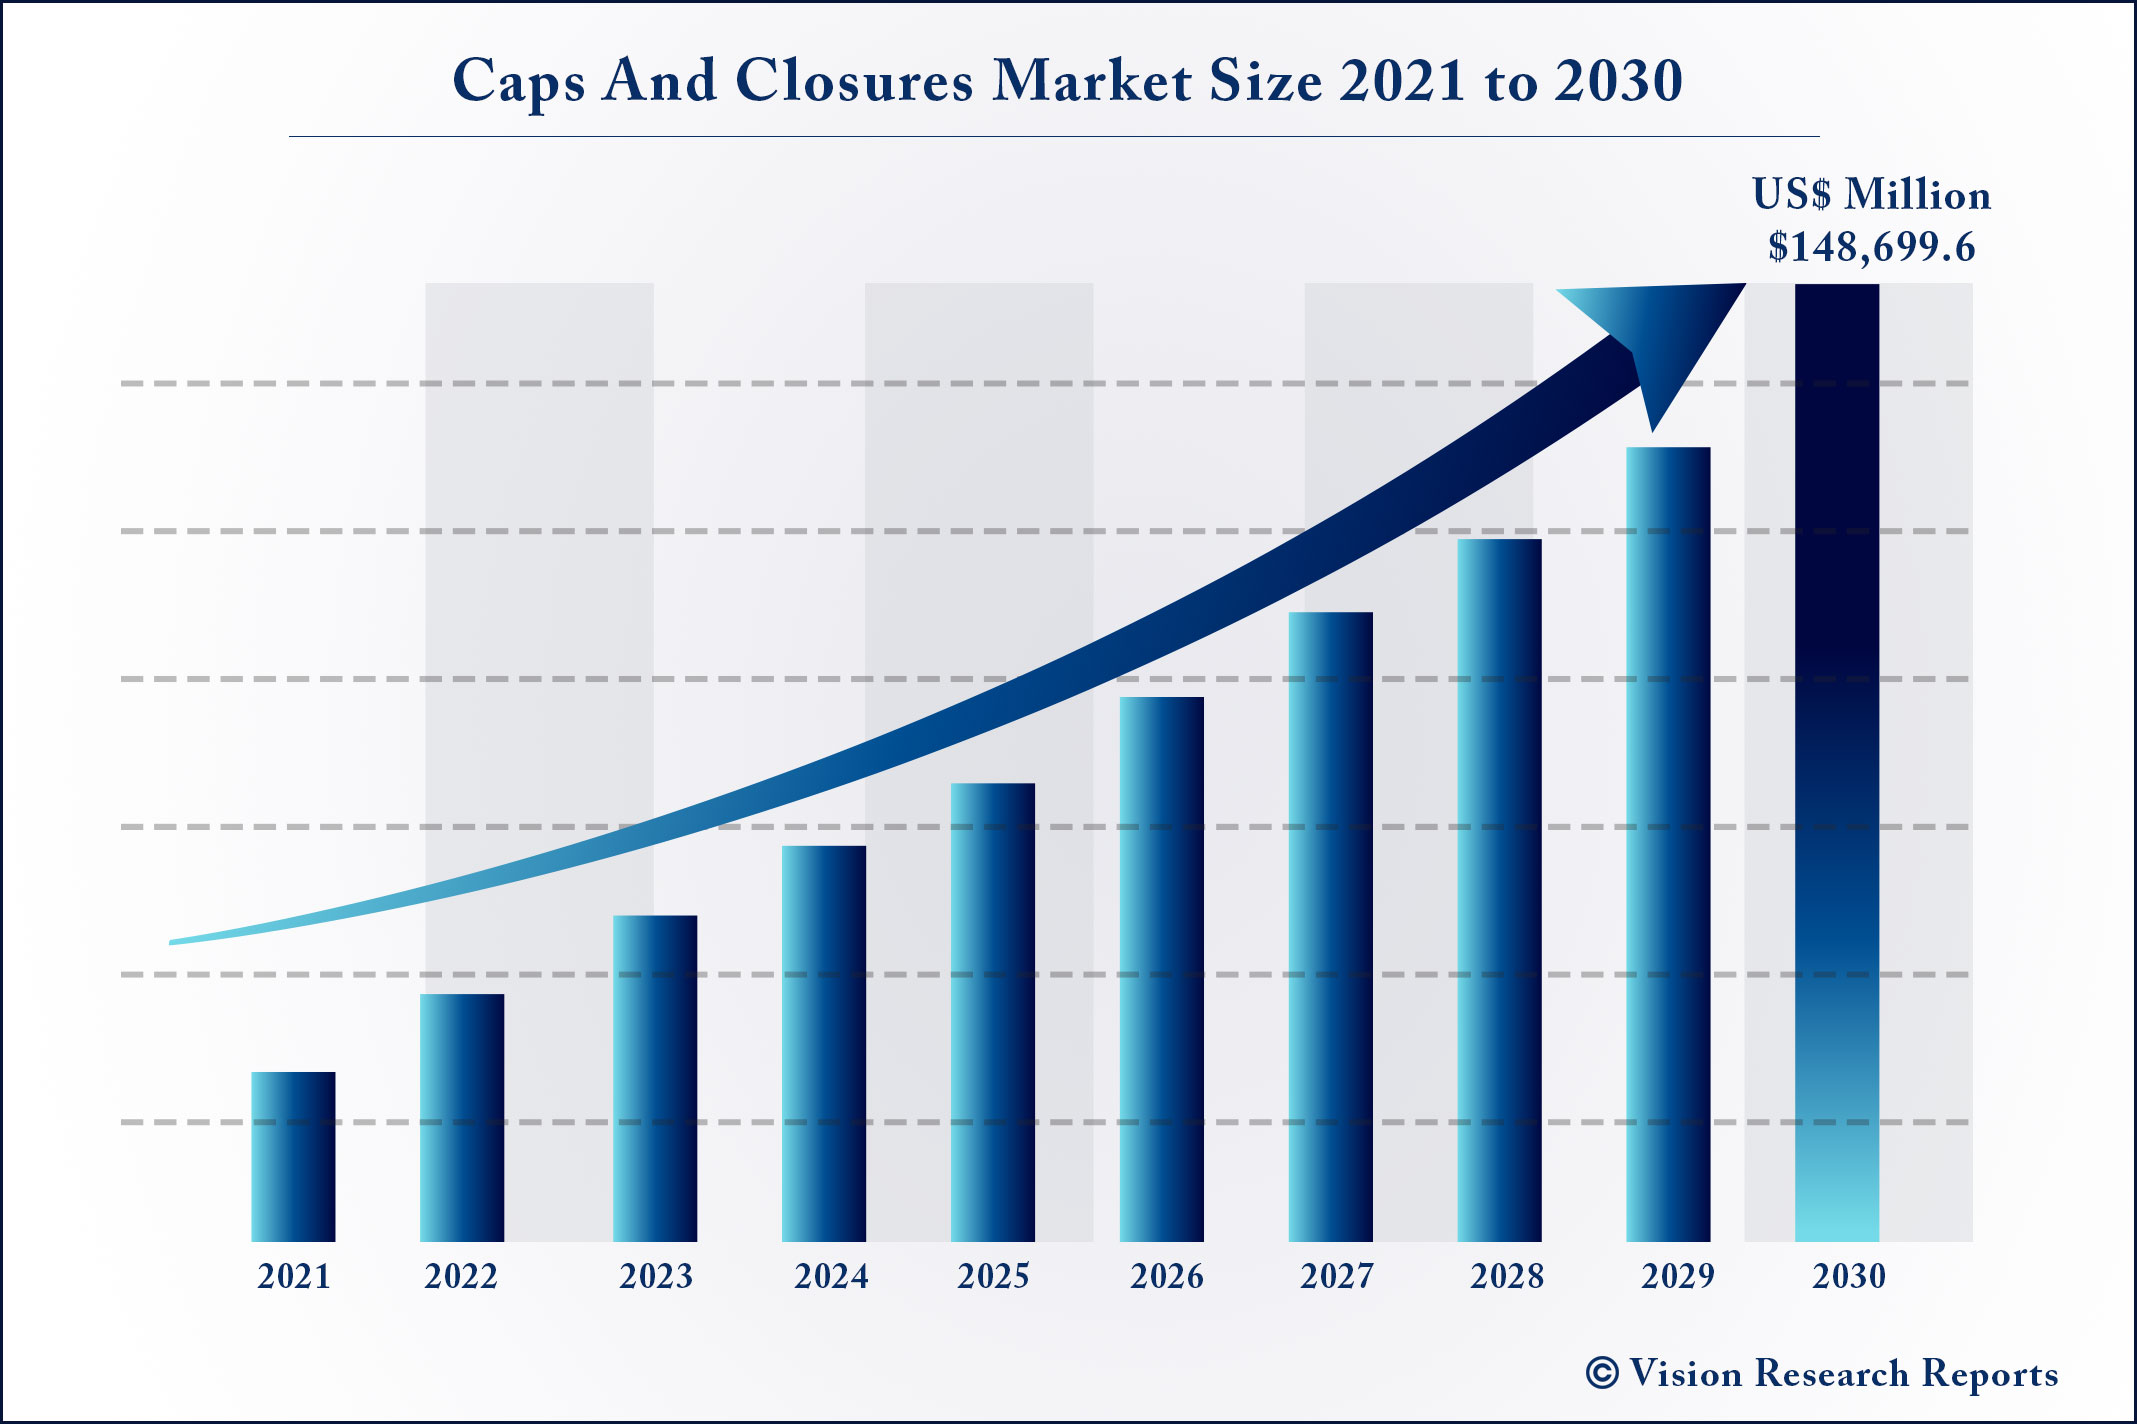 Caps And Closures Market Size 2021 to 2030 